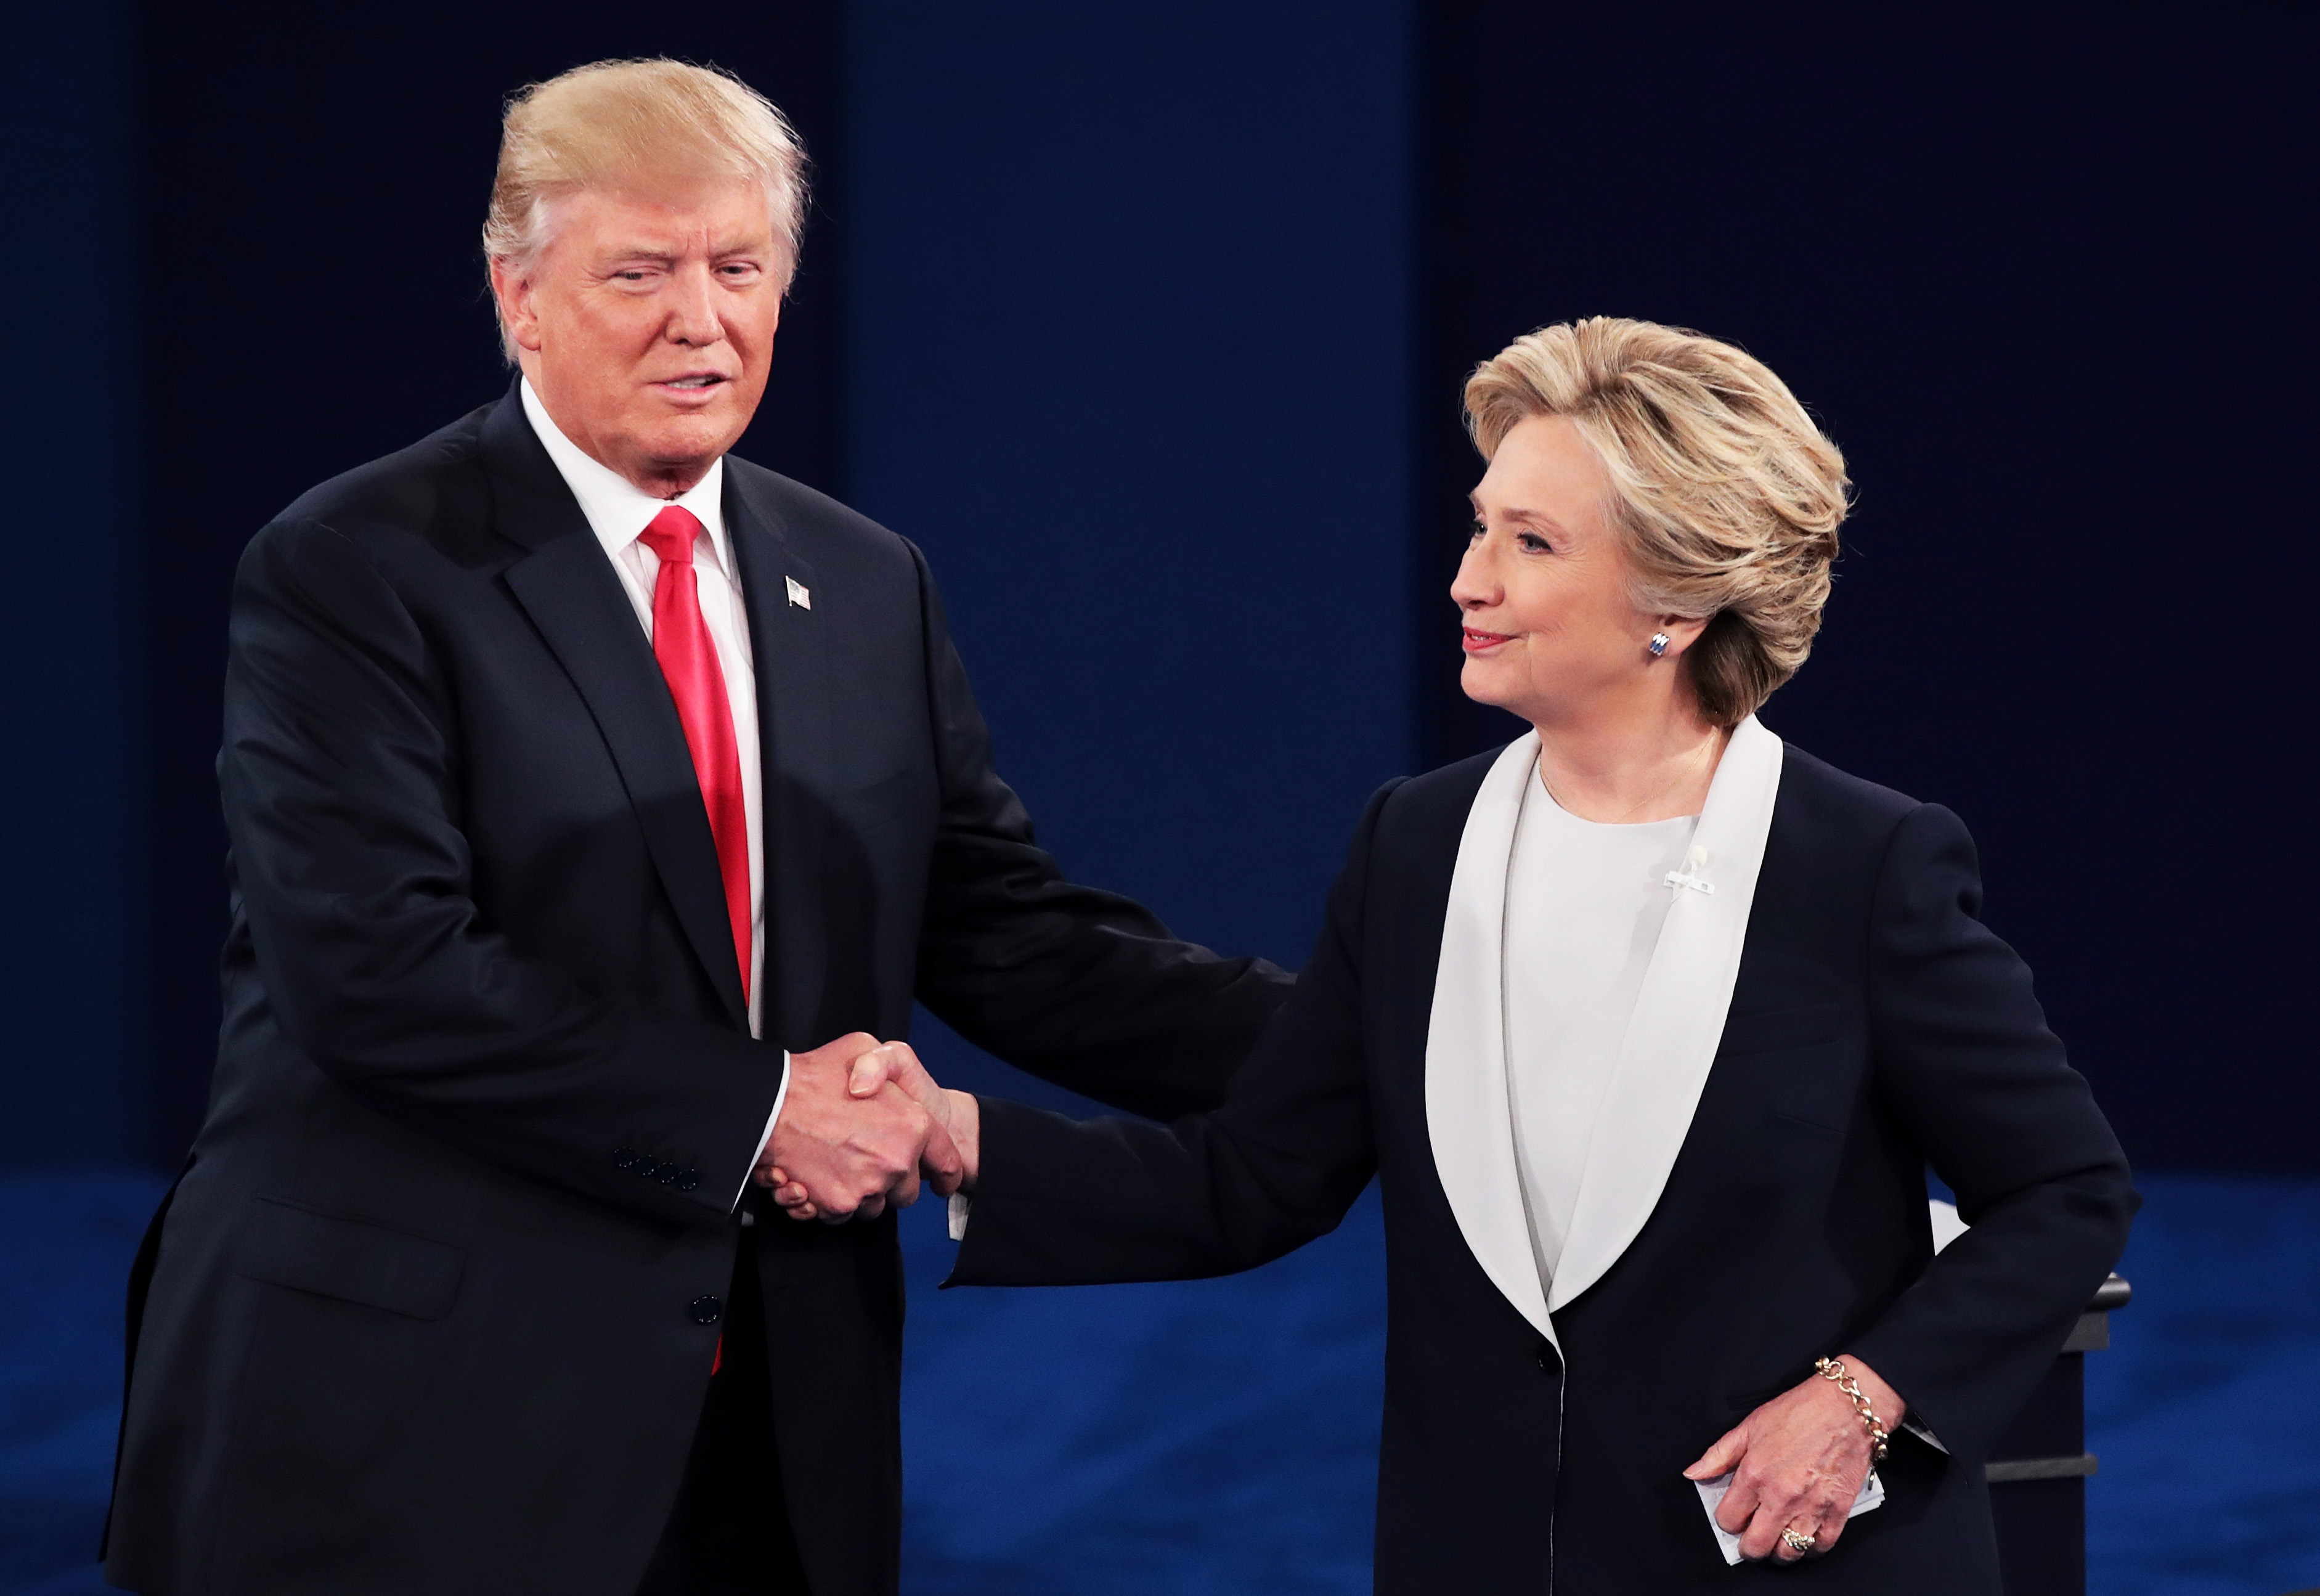 Republican presidential nominee Donald Trump (L) shakes hands with Democratic presidential nominee former Secretary of State Hillary Clinton during the town hall debate at Washington University on October 9, 2016 in St Louis, Missouri. This is the second of three presidential debates scheduled prior to the November 8th election. (Scott Olson&mdash;Getty Images)